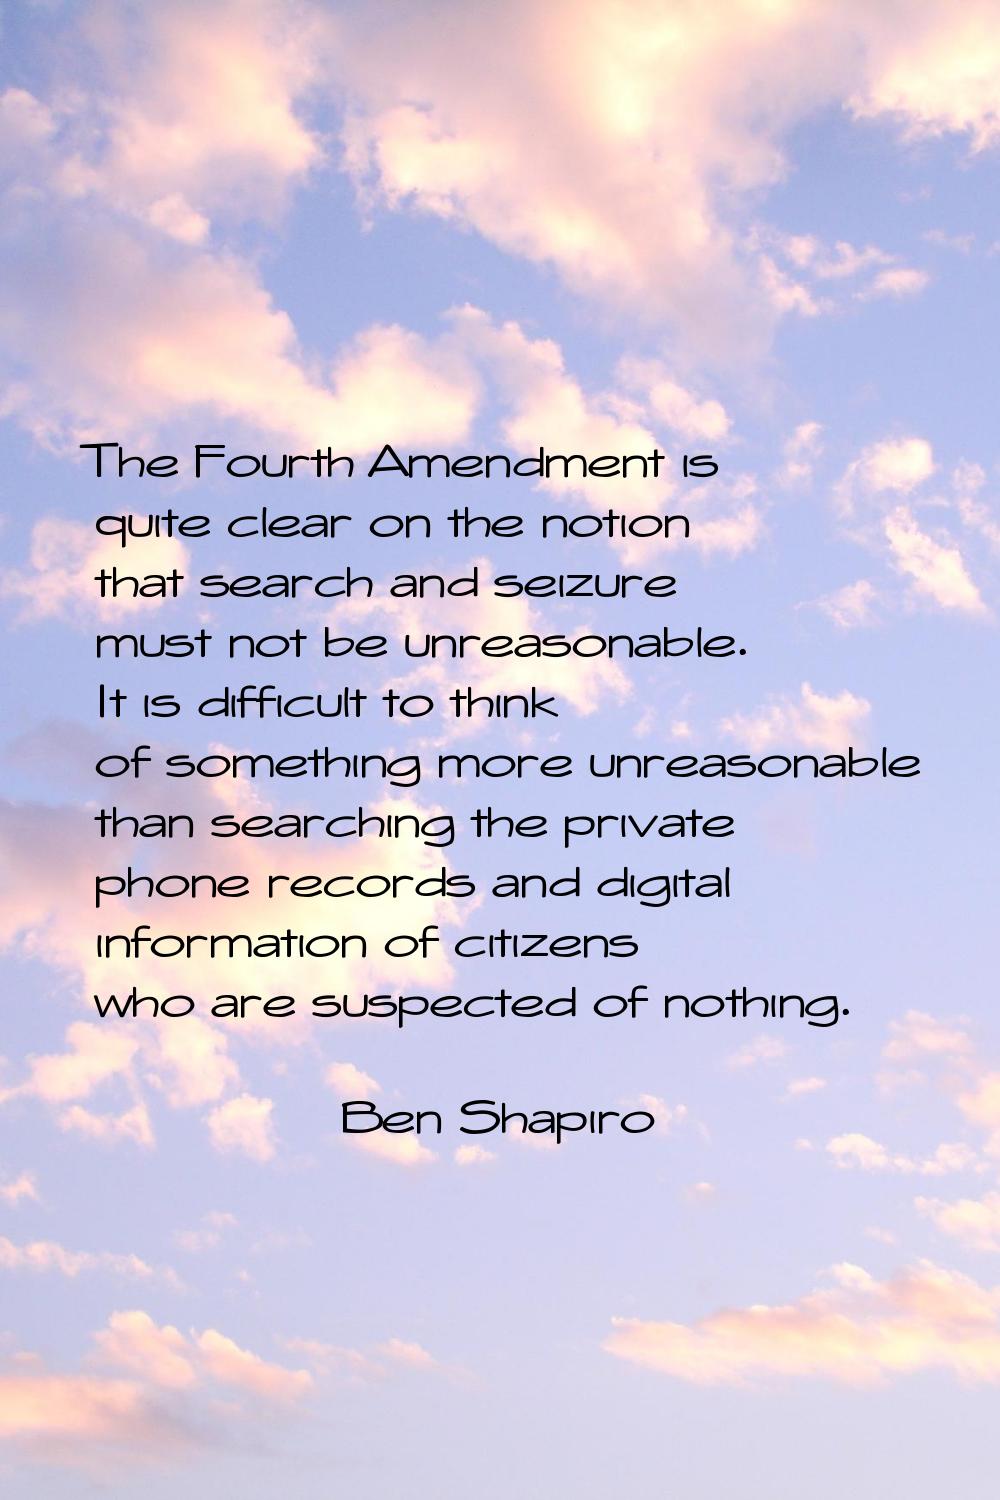 The Fourth Amendment is quite clear on the notion that search and seizure must not be unreasonable.